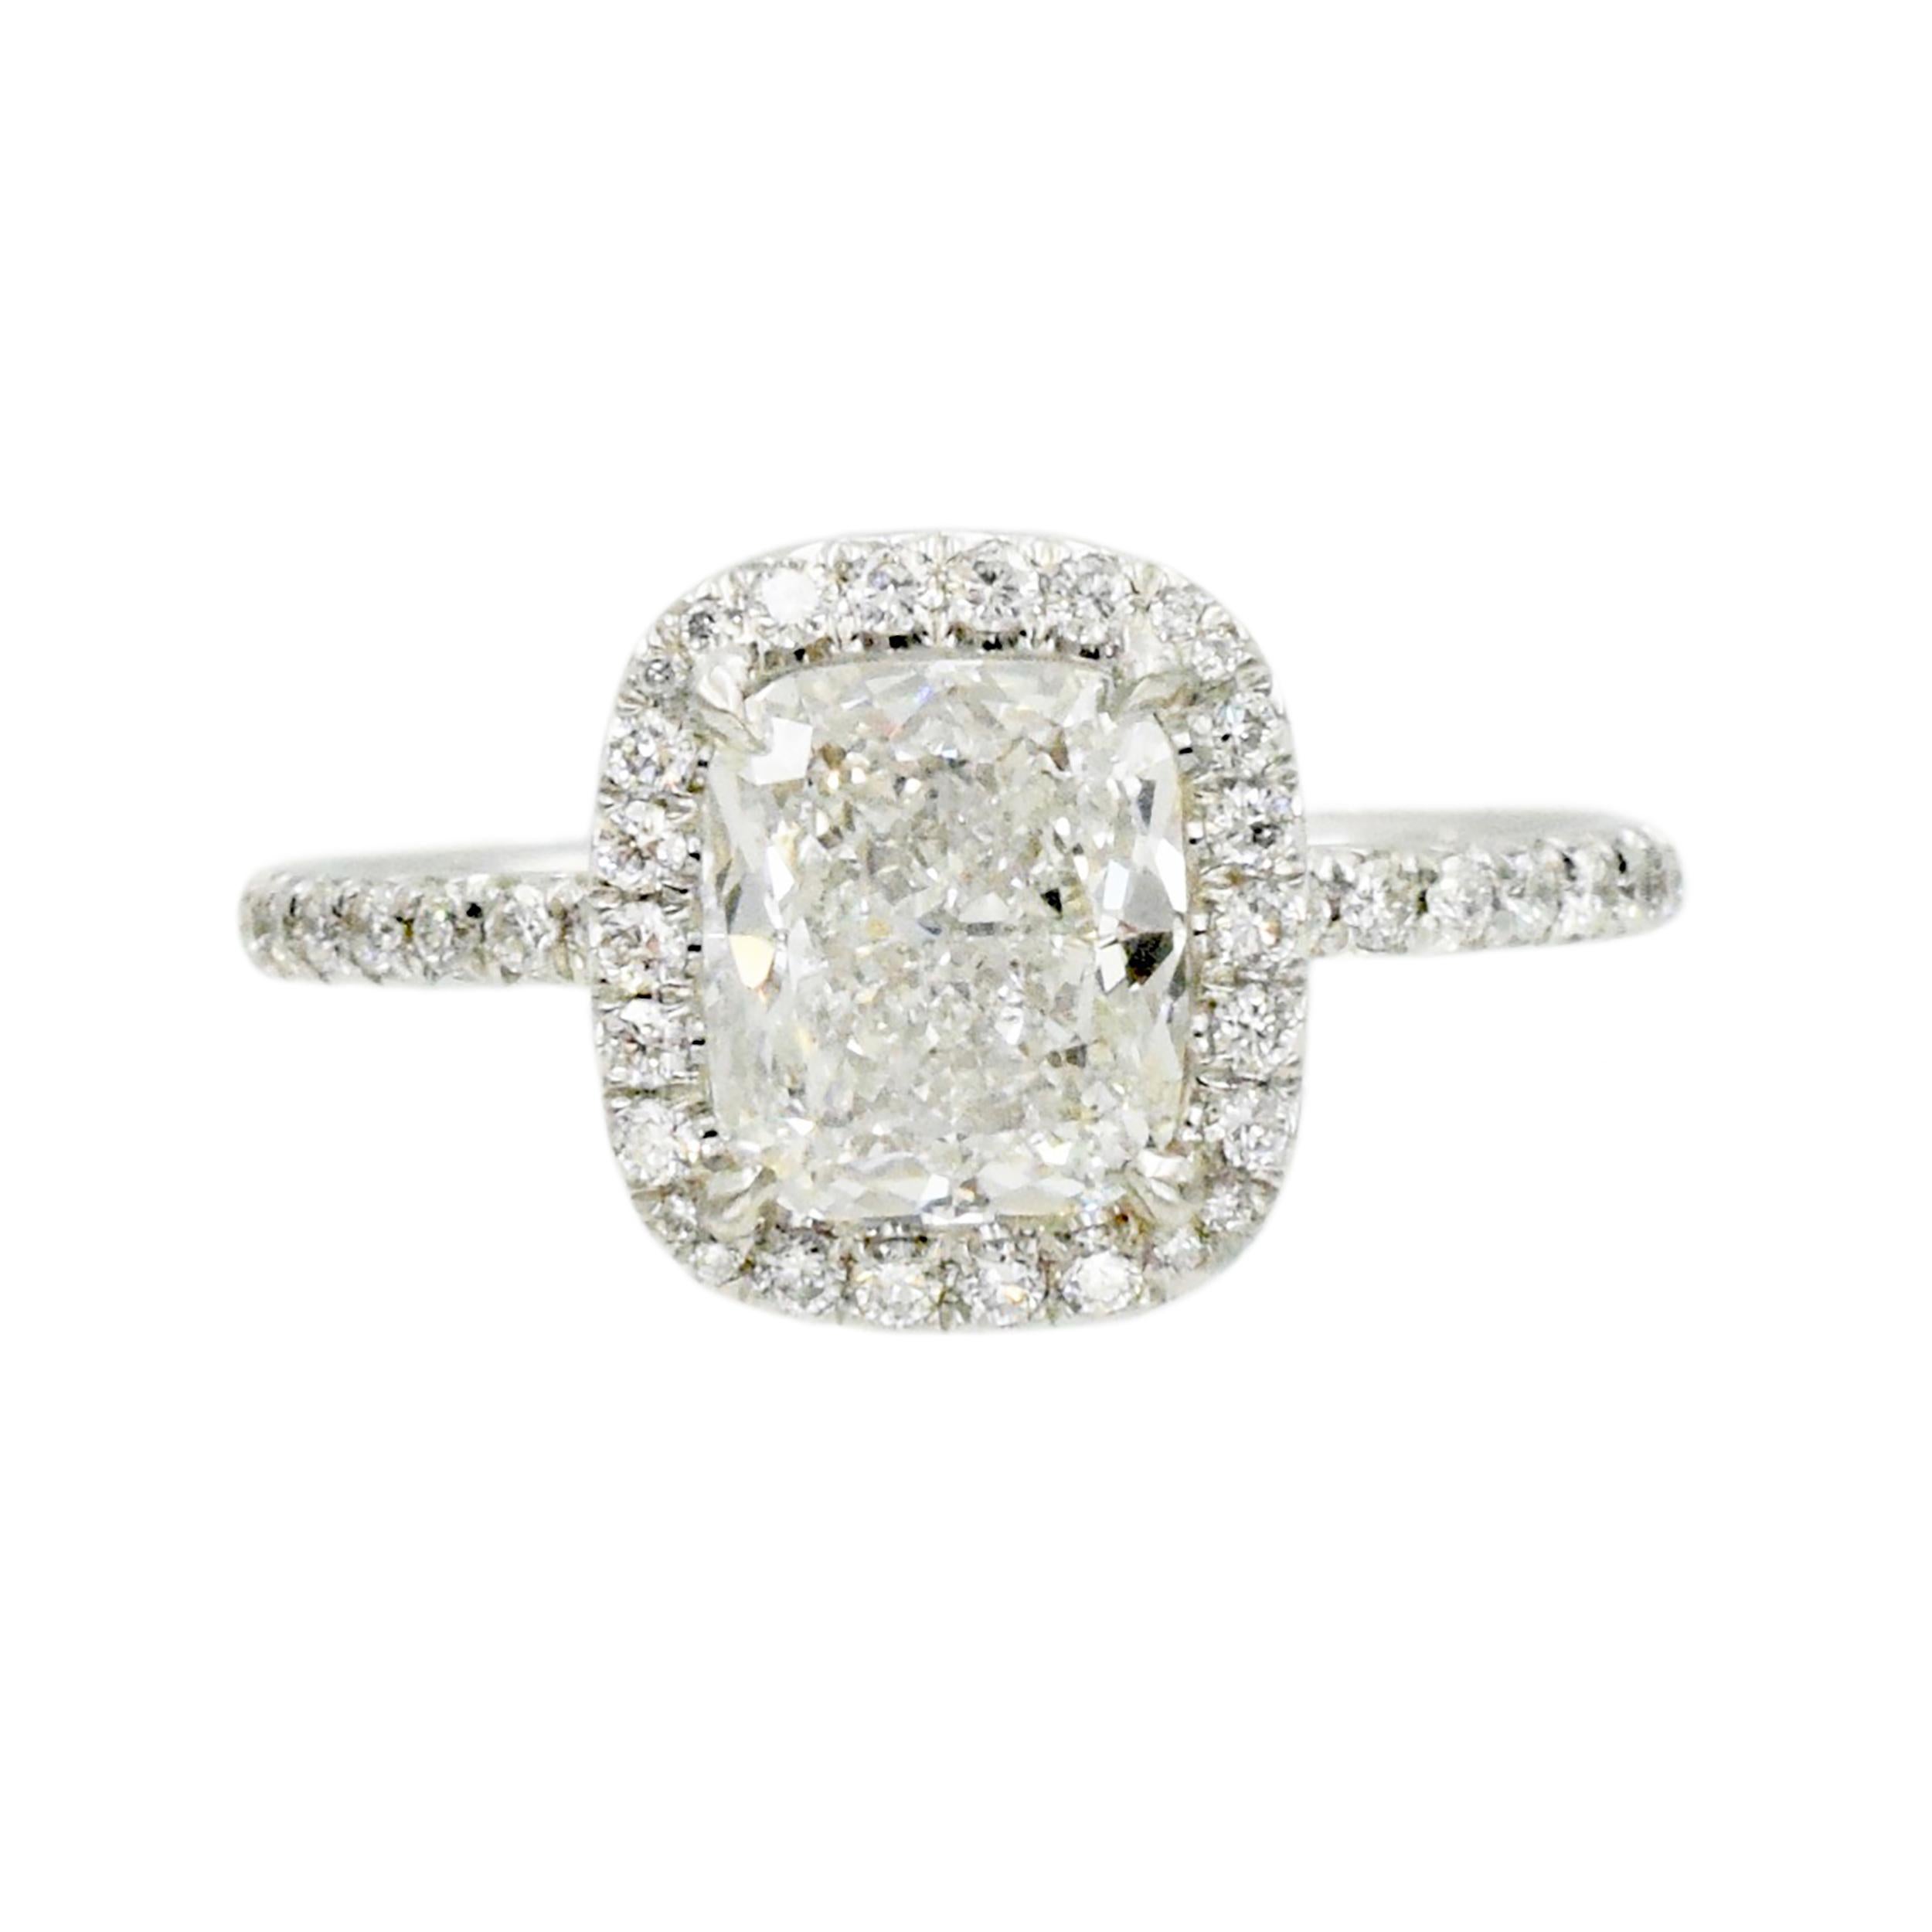 Solitaire with accents engagement ring made in platinum. Pave-set 66 round brilliant cut diamonds total weight 0.45ct, center stone: 1.92ct cushion modified brilliant cut diamond, color: E, clarity: VS1, GIA# 2136629262, surrounded by diamond pave